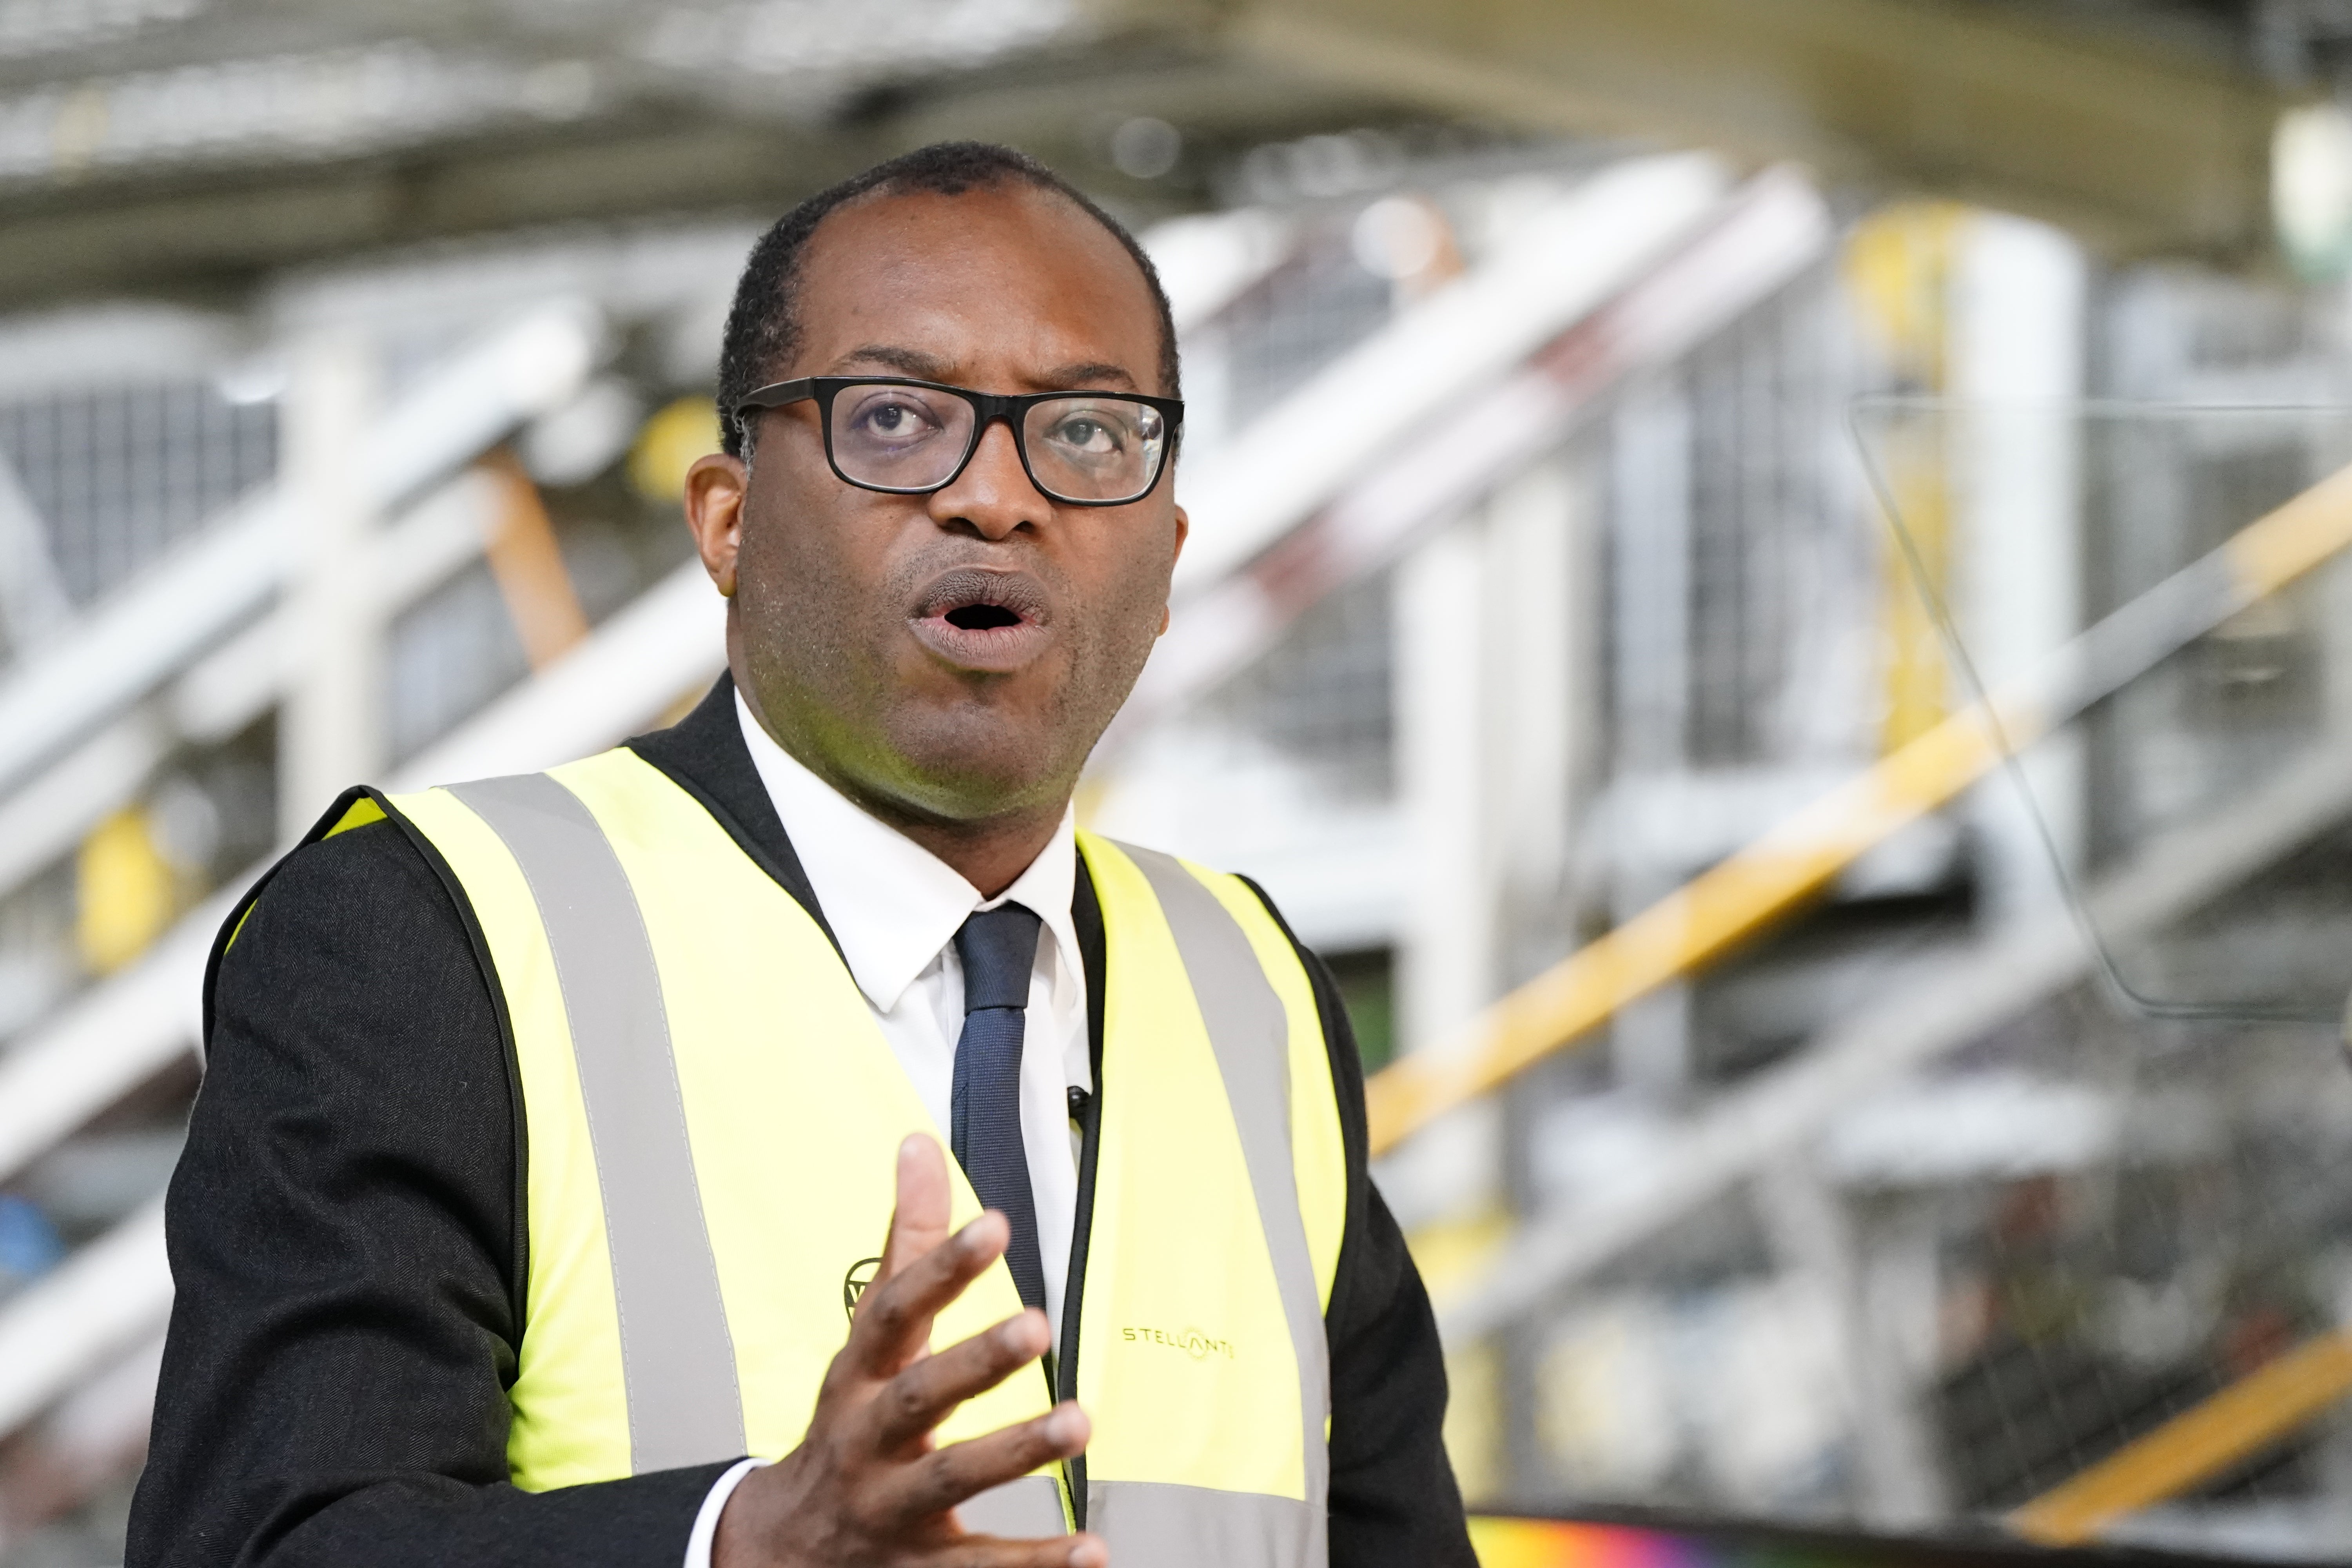 Despite Mr Kwarteng reportedly seeking to reassure oil industry executives, Shell pulled out of the controversial Cambo project weeks later (Peter Byrne/PA)